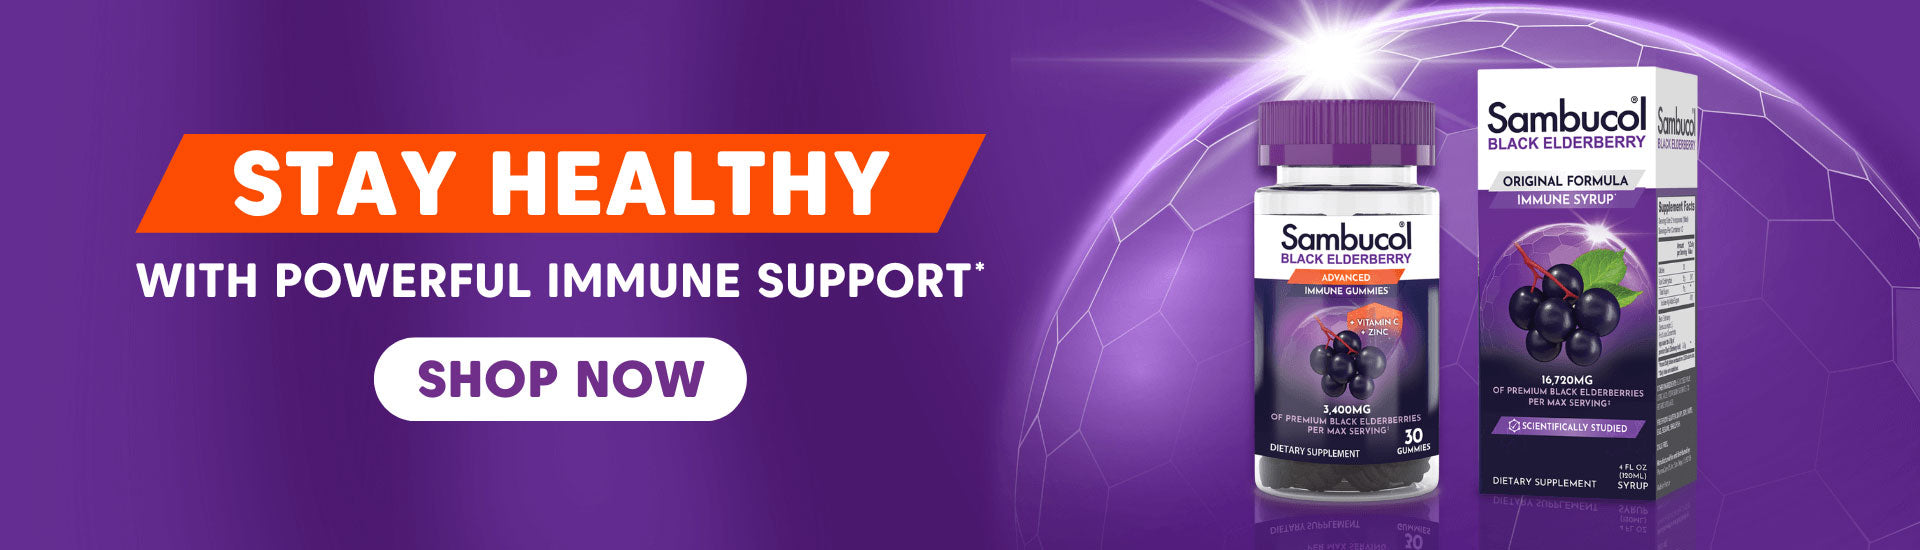 Stay Healthy with Powerful Immune Support